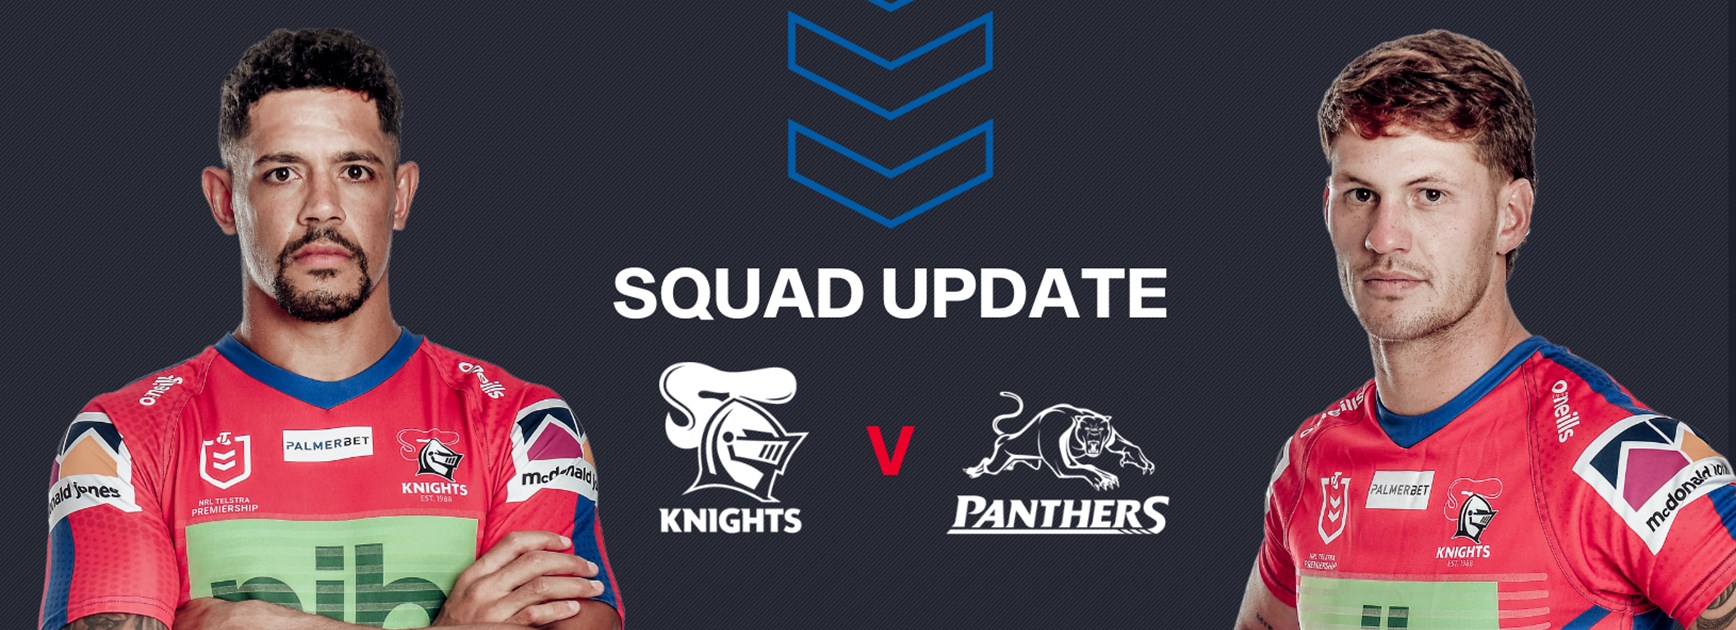 Squad Update: Knights v Panthers